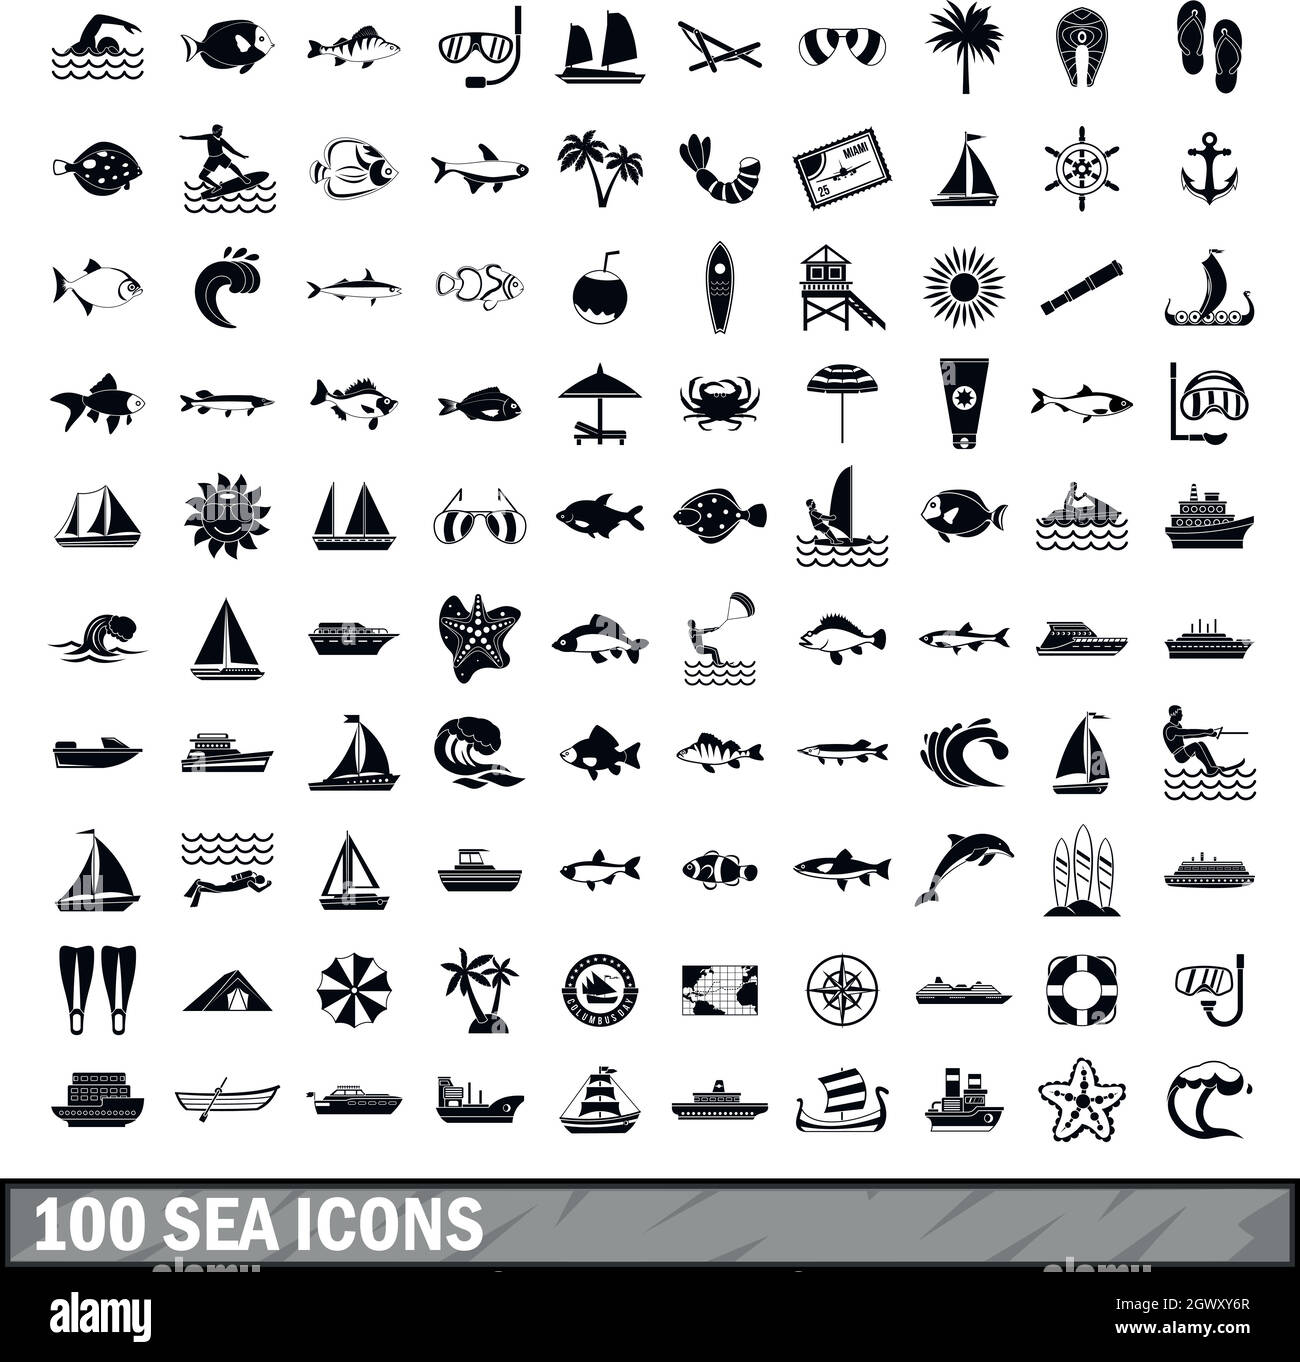 100 sea icons set in simple style Stock Vector